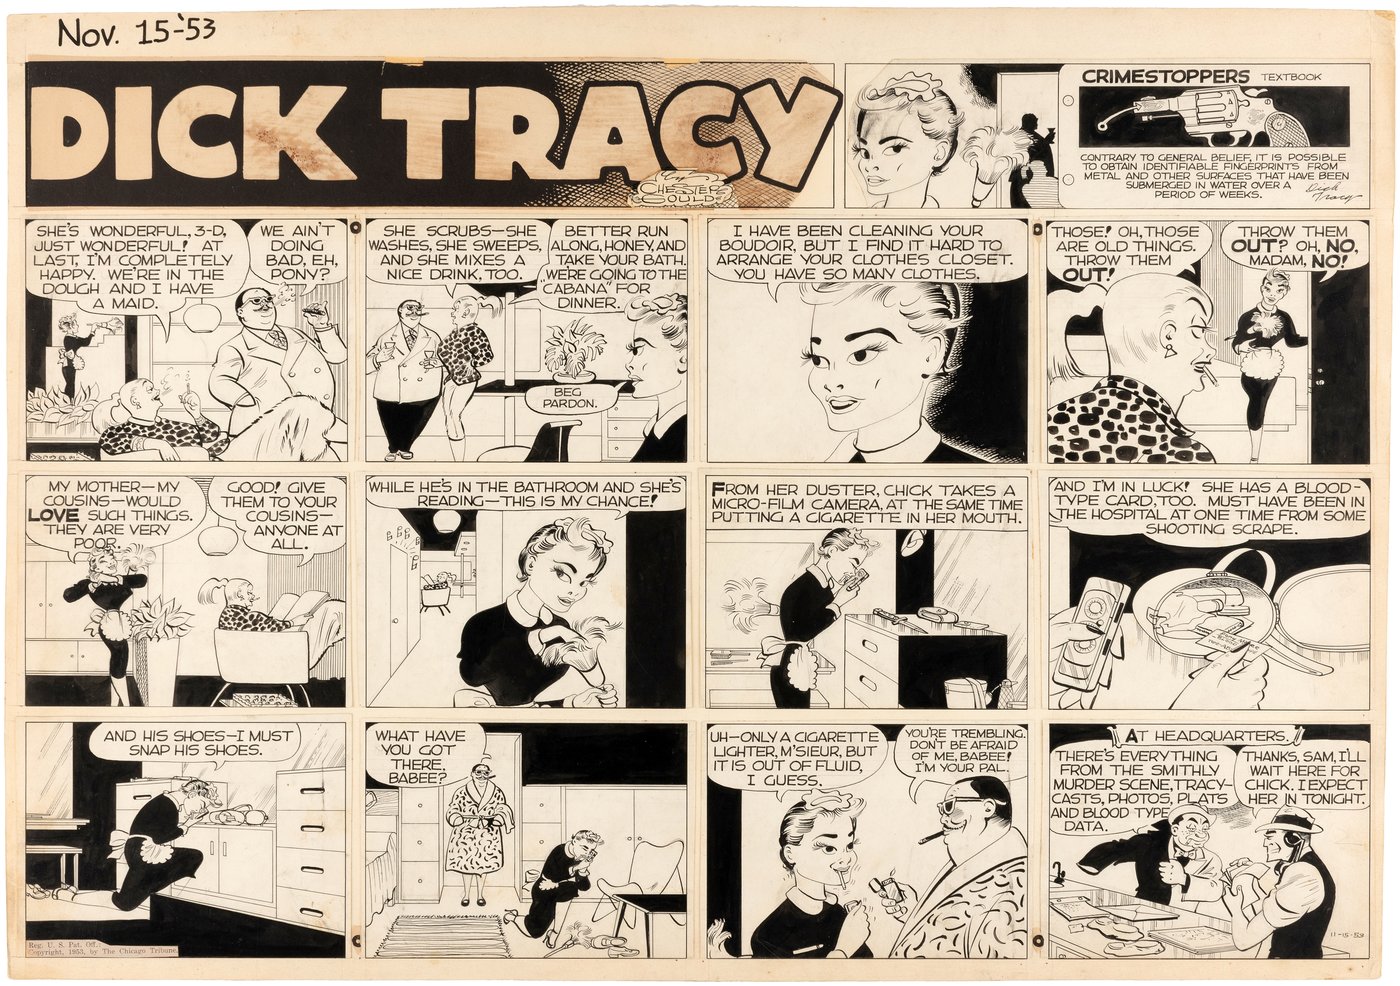 Hake's - DICK TRACY 1953 SUNDAY PAGE ORIGINAL ART BY CHESTER GOULD.